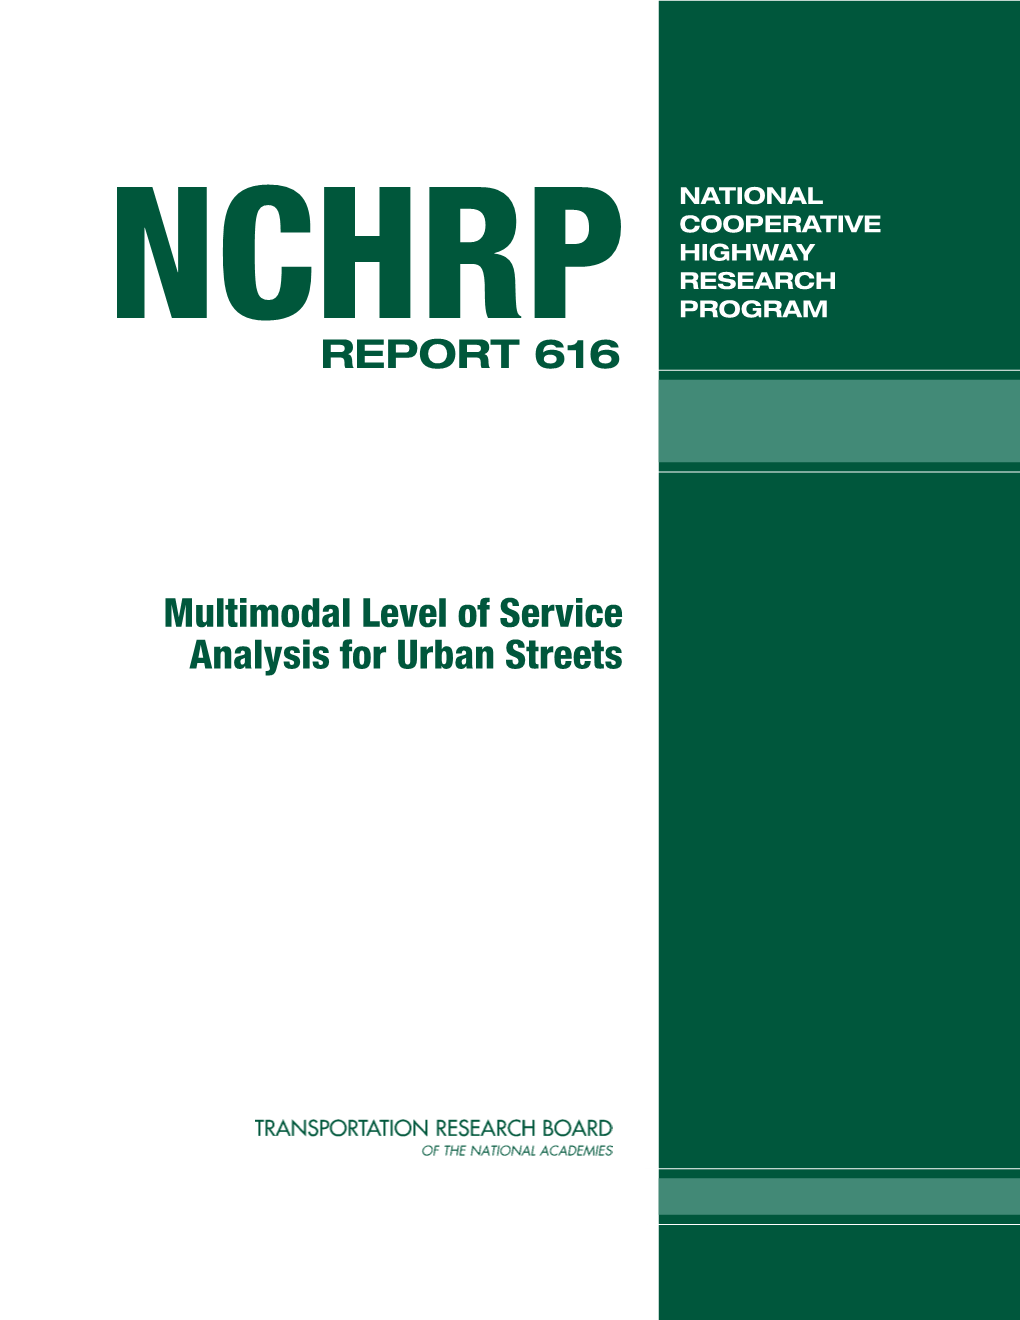 NCHRP Report 616 – Multimodal Level of Service Analysis for Urban